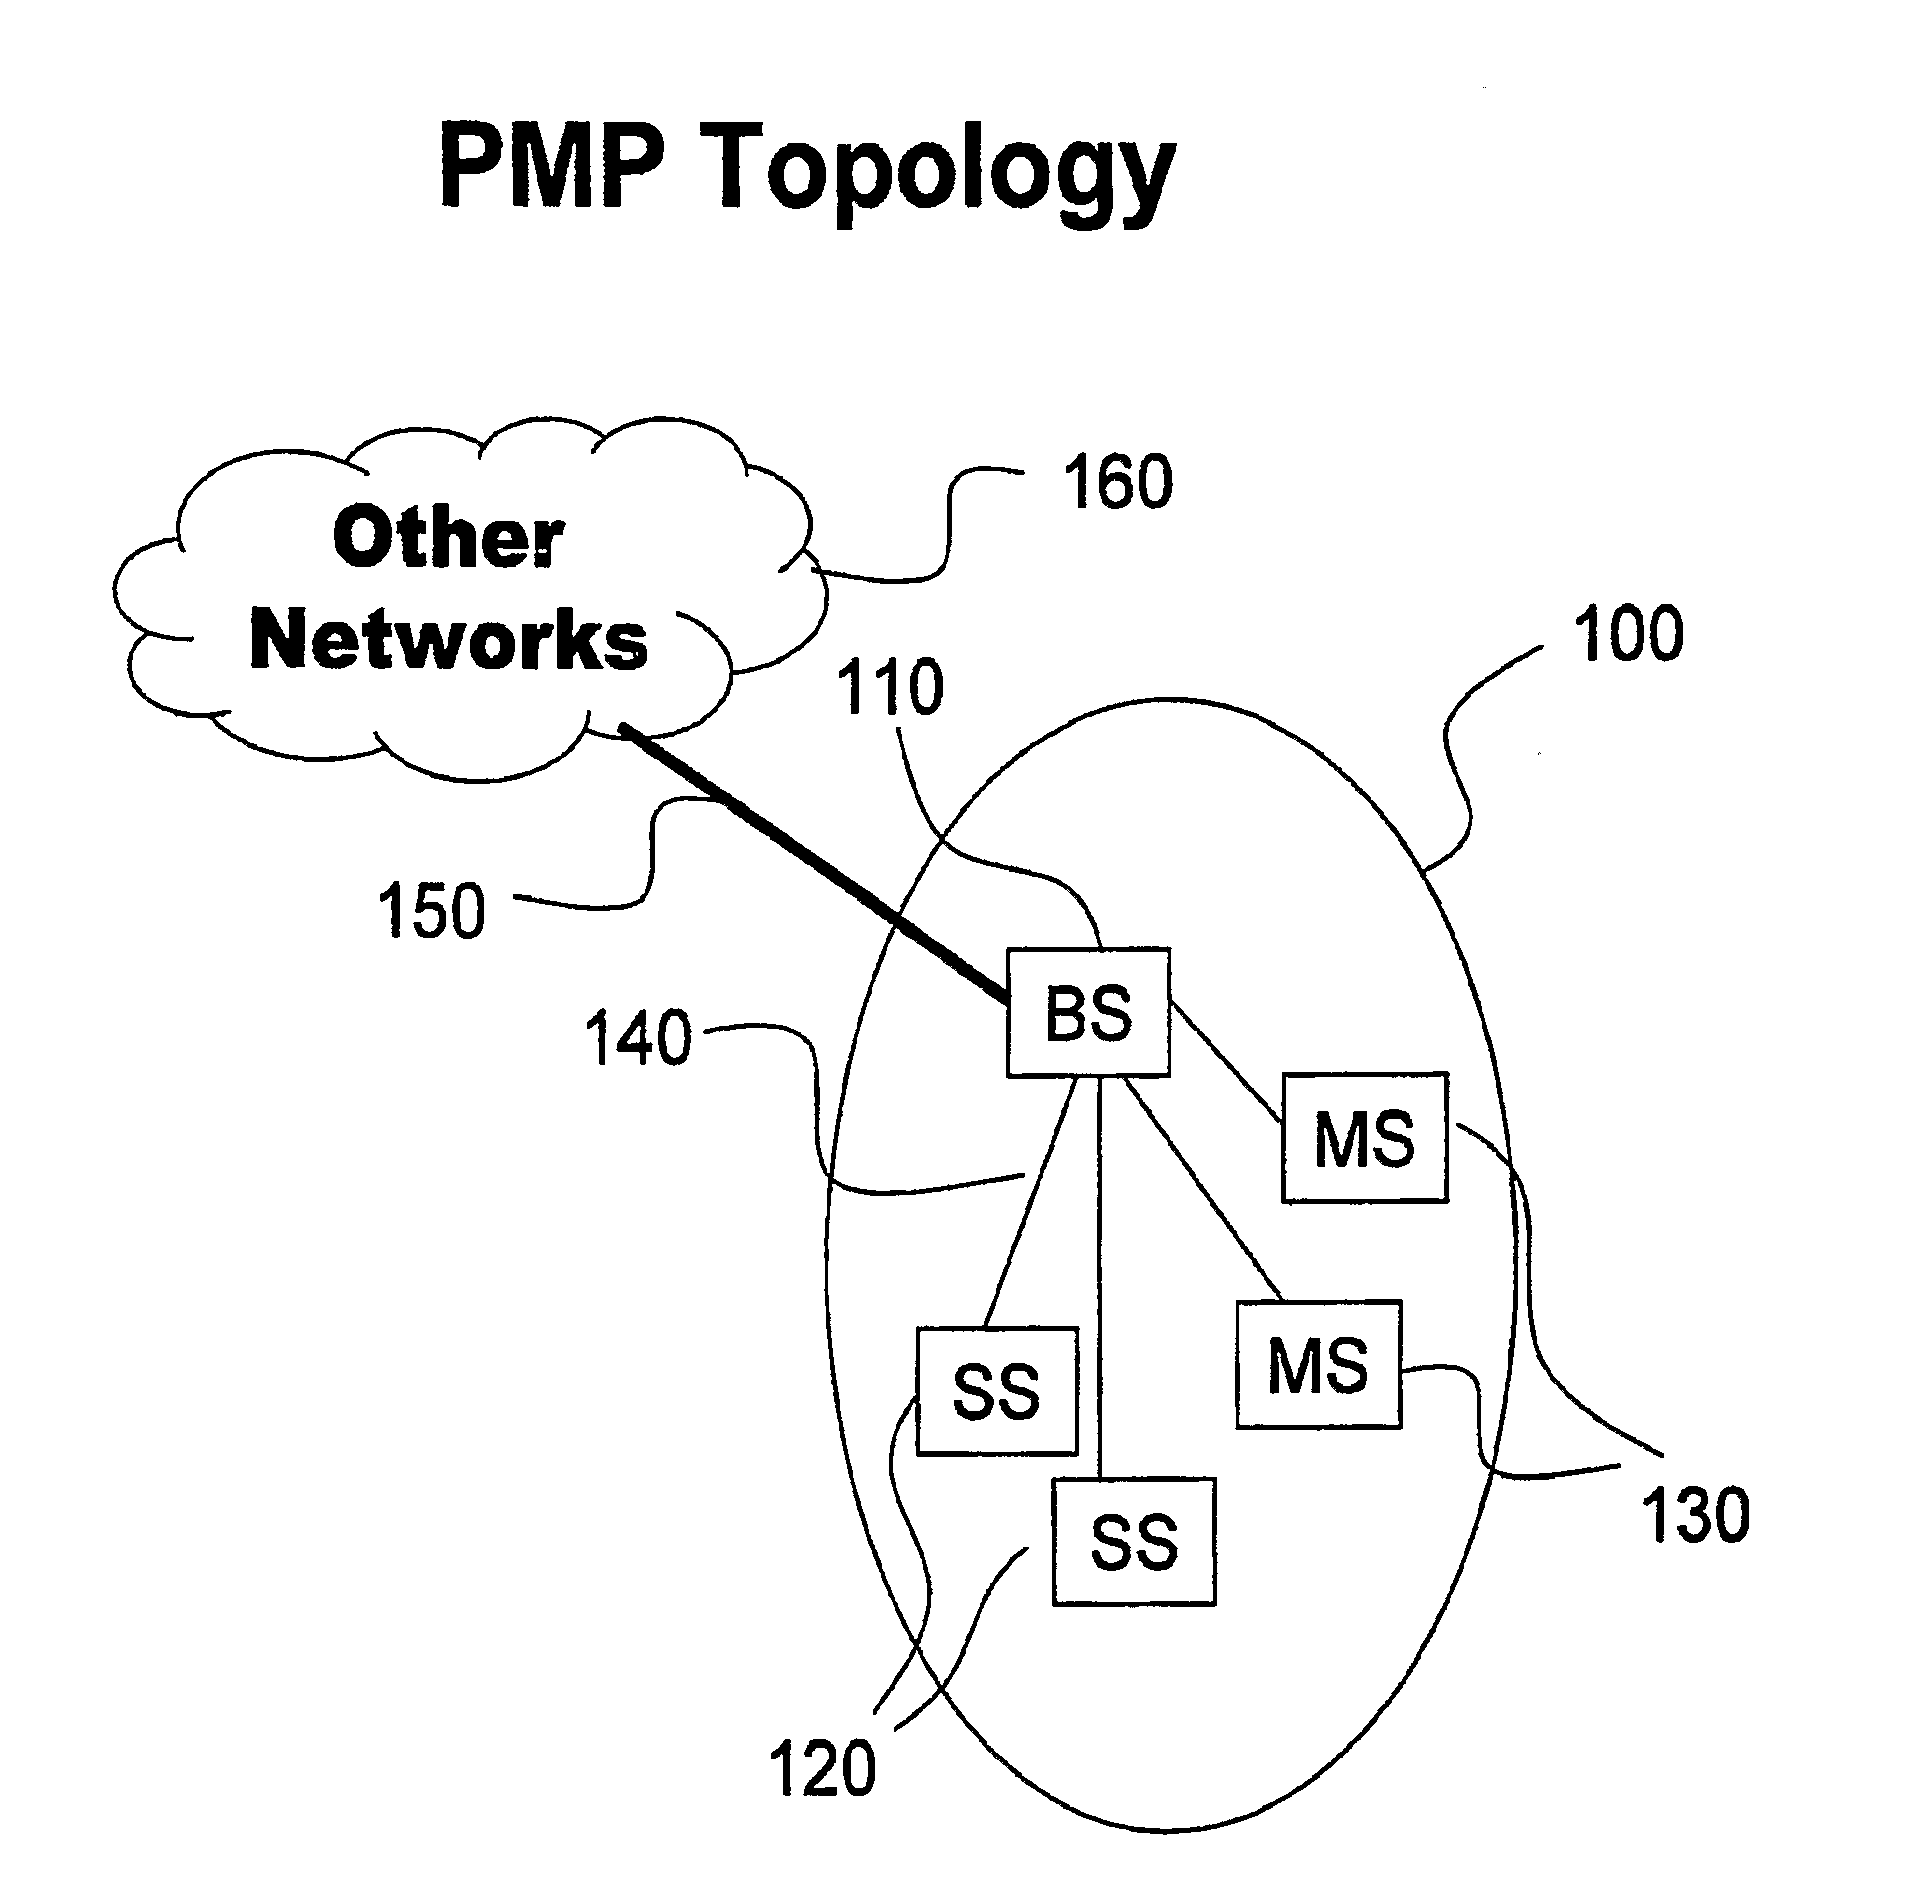 Supporting mobile ad-hoc network (Manet ) and point to multi-point (pmp) communications among nodes in a wireless network